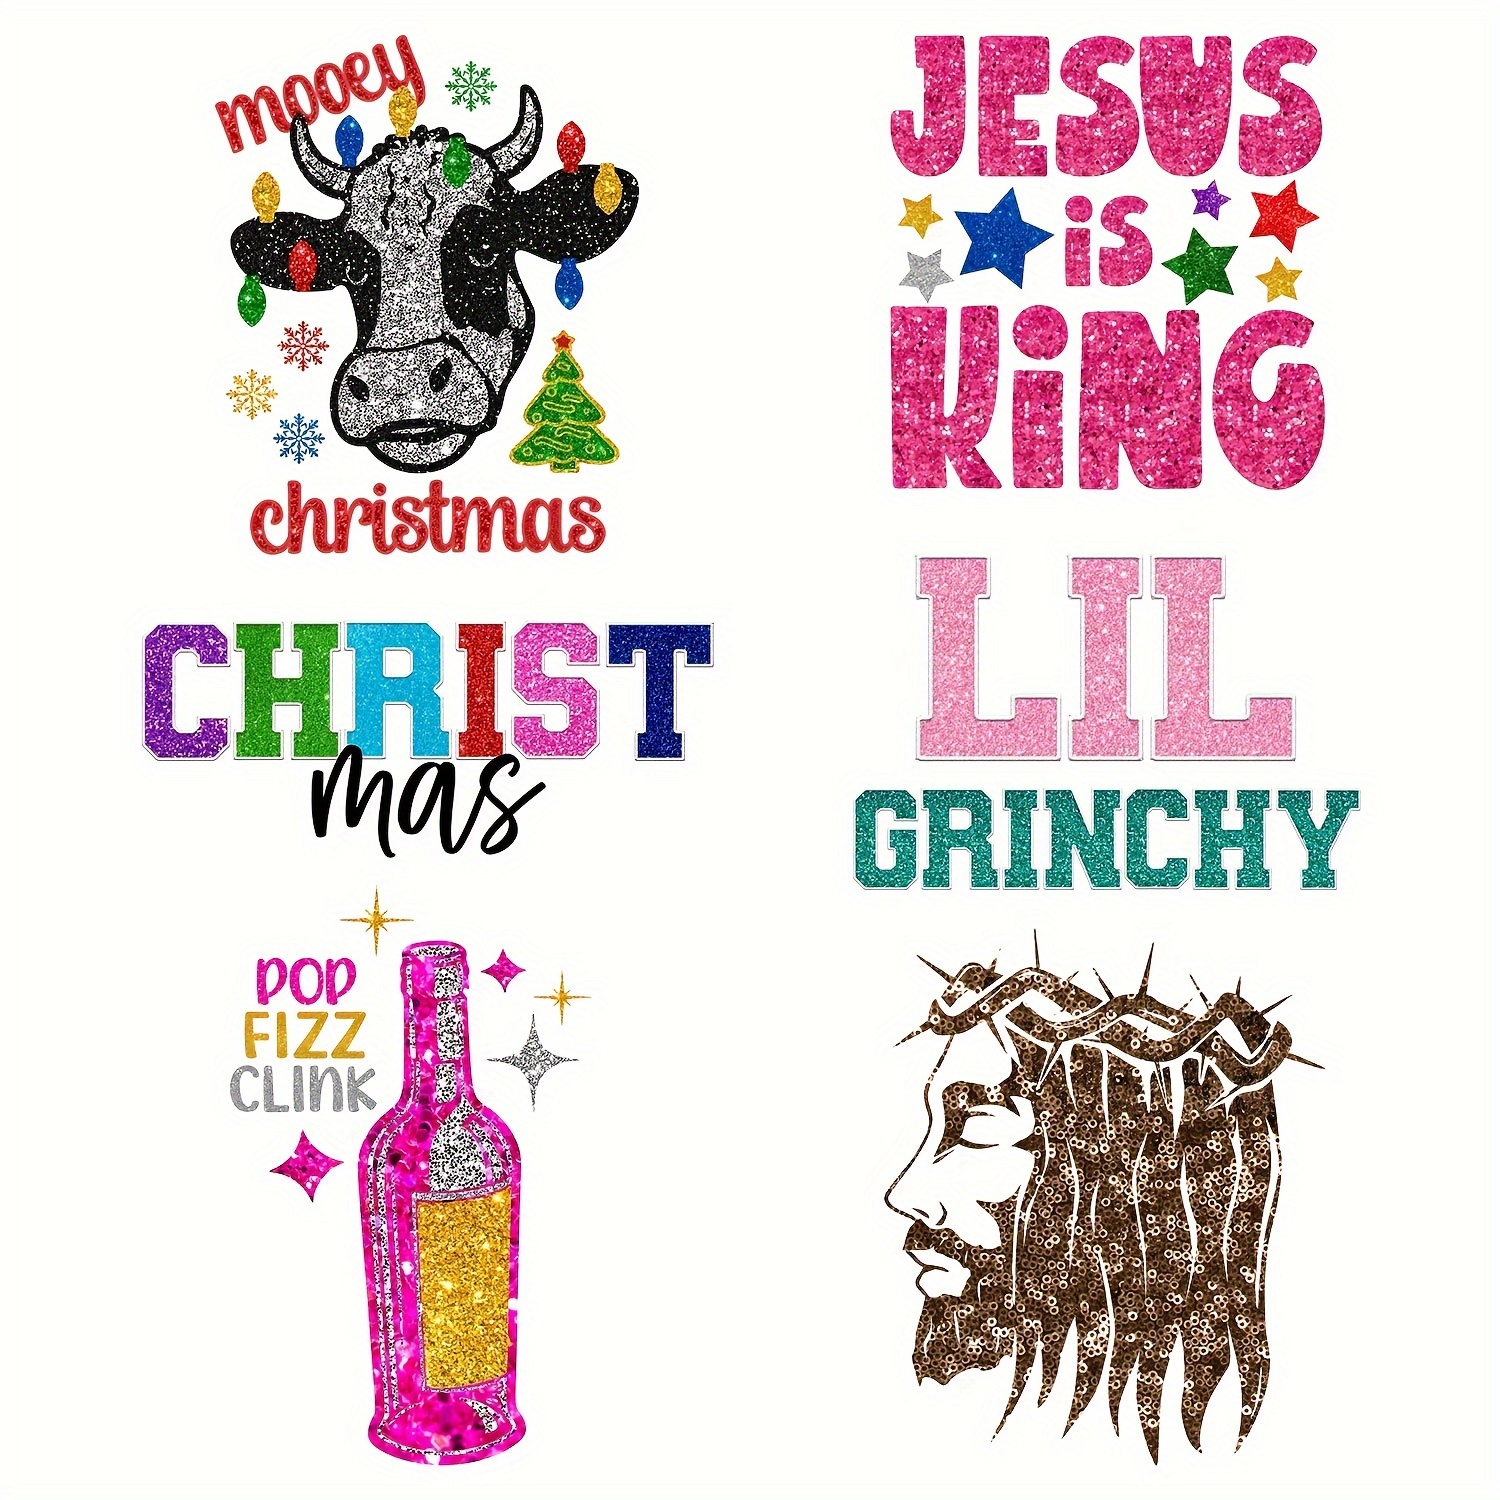 Jesus Is King Christian Iron On Vinyl Decal Transfers for  T-shirts/Sweatshirts